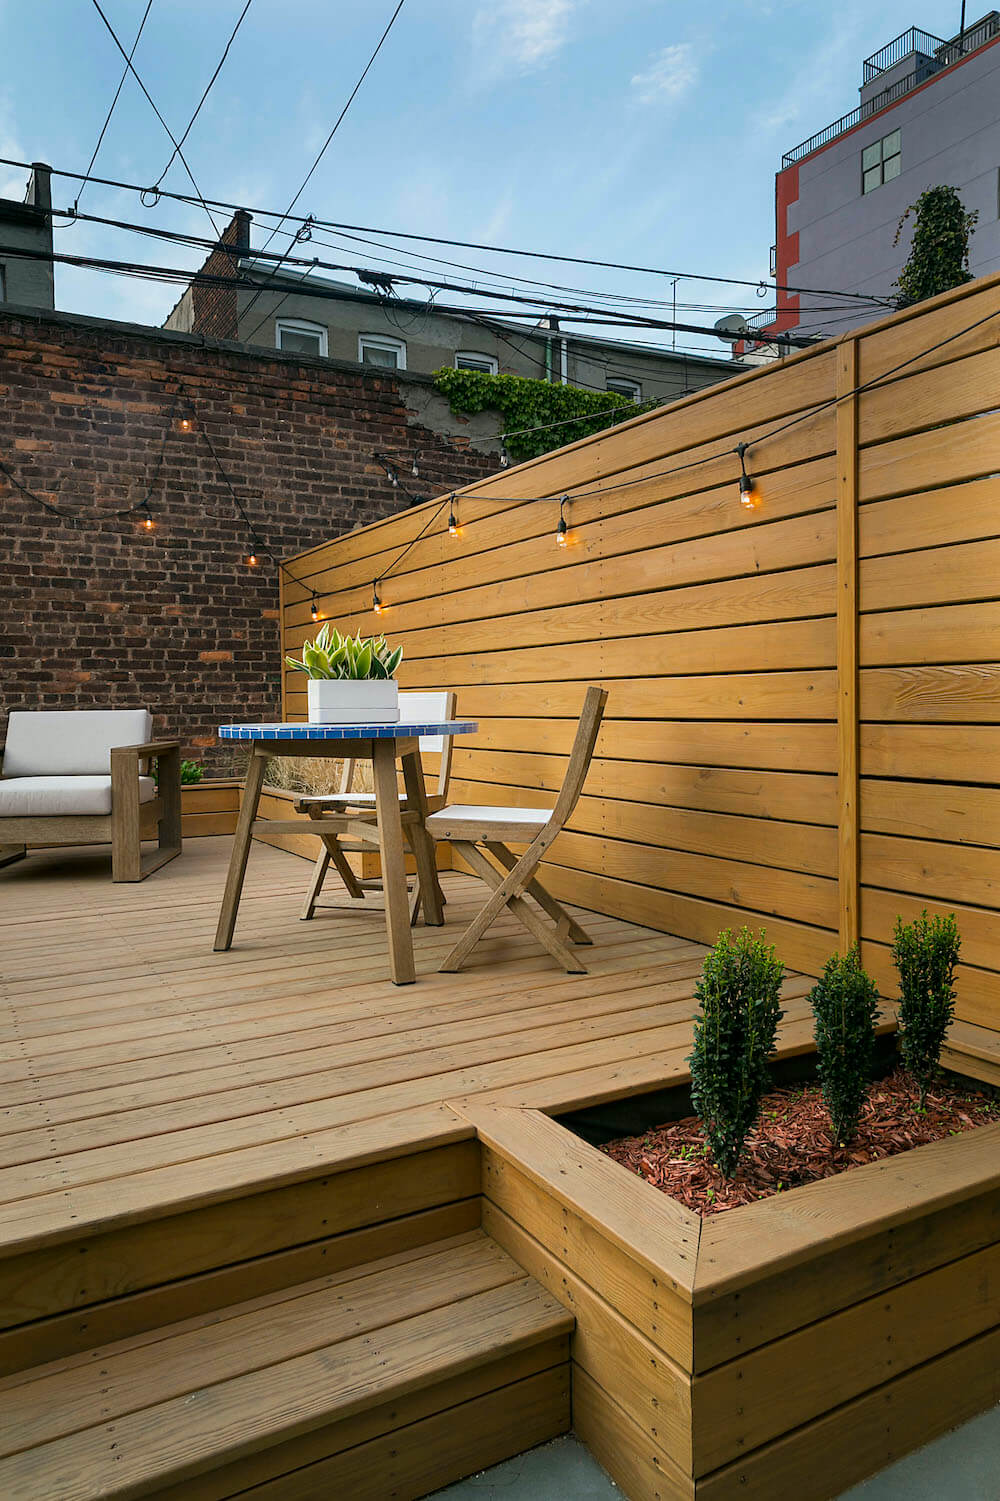 Image of a renovated backyard with wooden walls and built-in planters